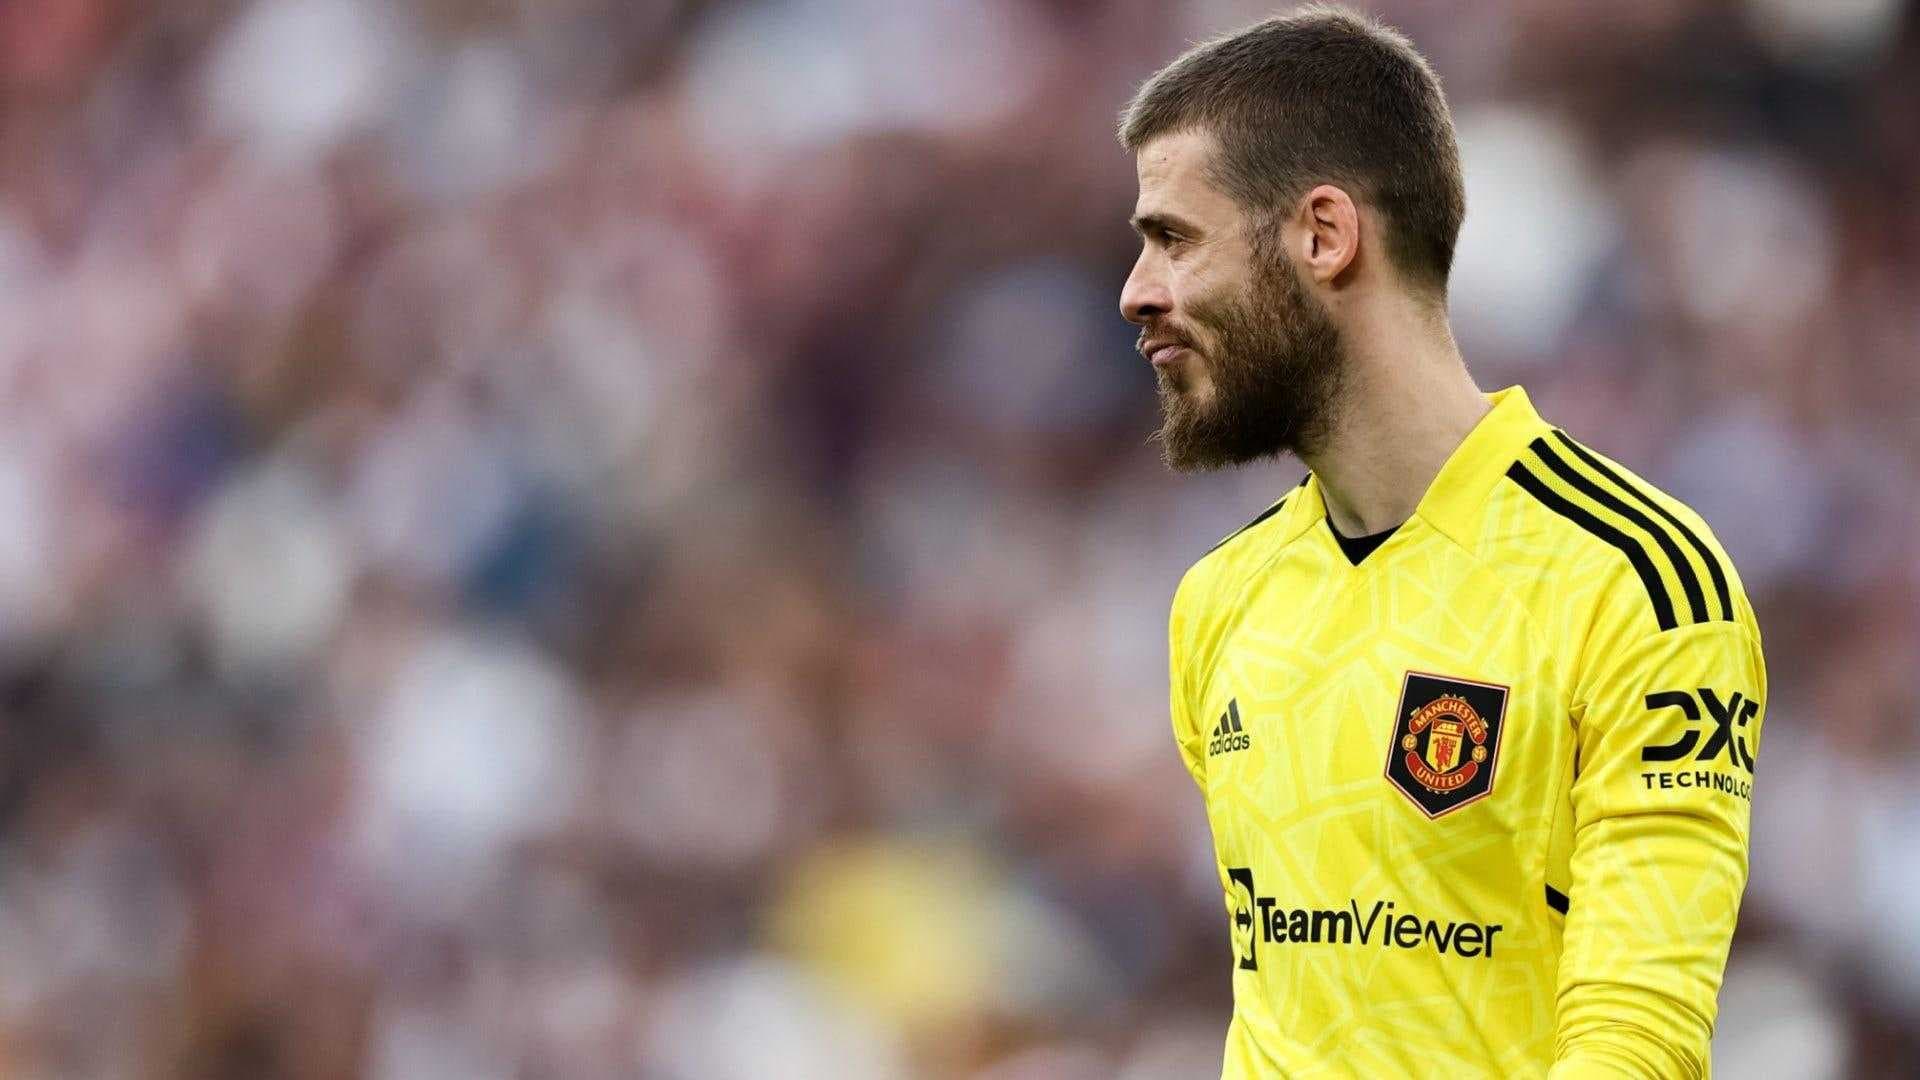 De Gea demands guarantees from FC Barcelona for the signing
	

